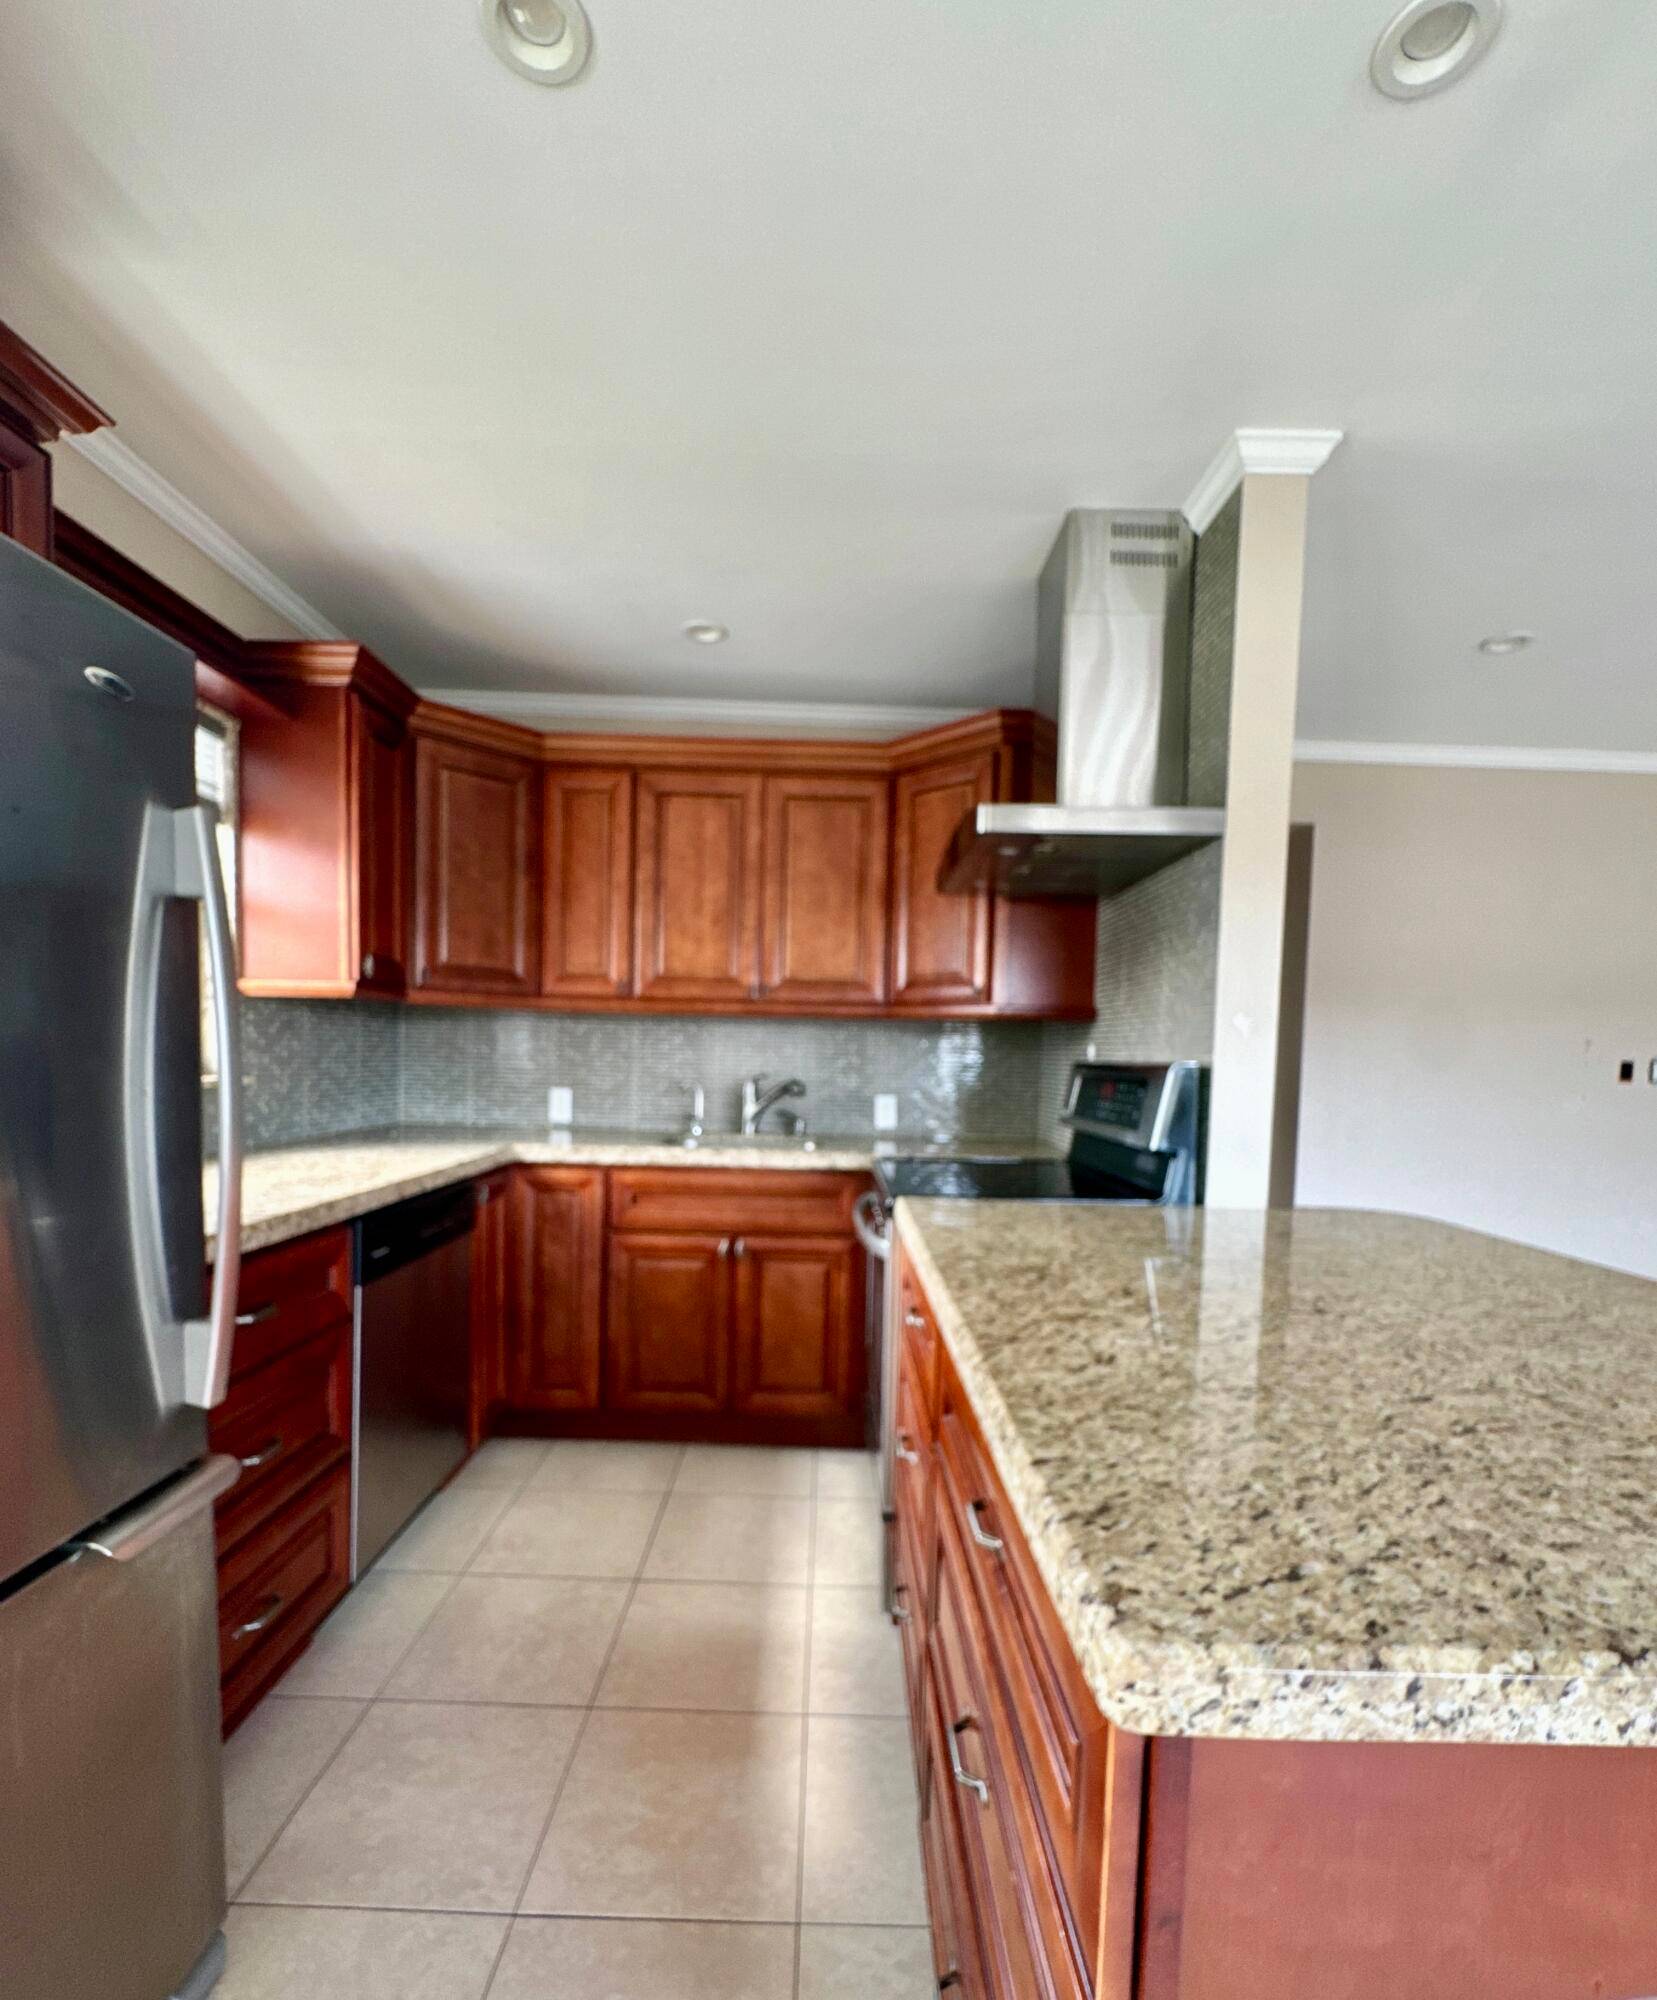 2 bedroom 1 and a half bath Beautiful water views from this corner unit, All updated with a gorgeous kitchen with granite countertop and stainless steel appliances.